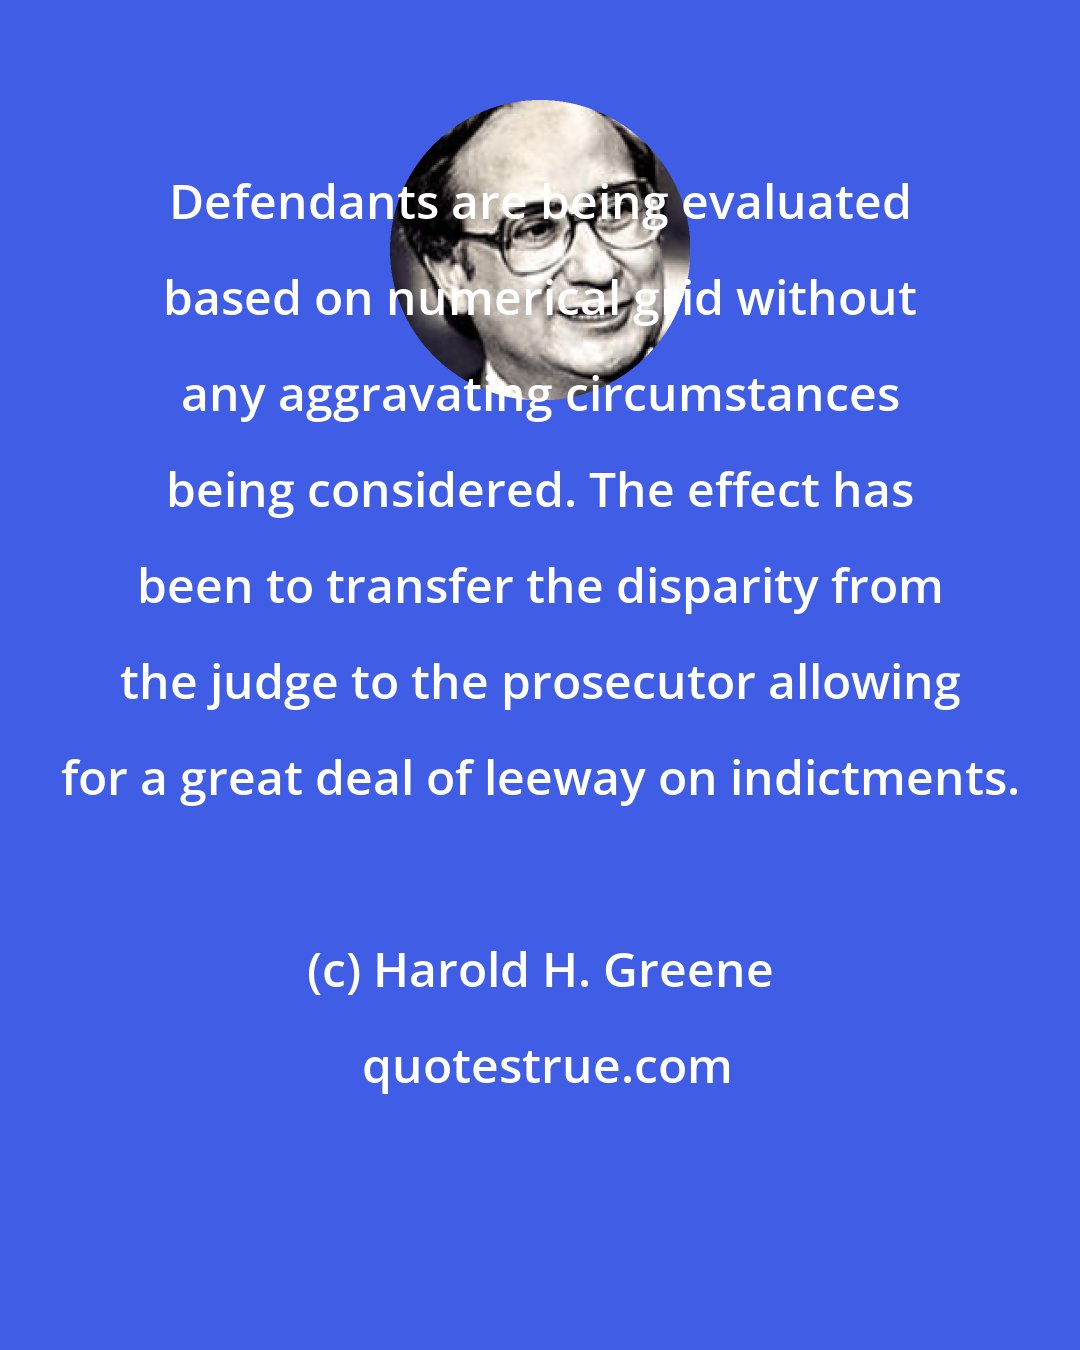 Harold H. Greene: Defendants are being evaluated based on numerical grid without any aggravating circumstances being considered. The effect has been to transfer the disparity from the judge to the prosecutor allowing for a great deal of leeway on indictments.